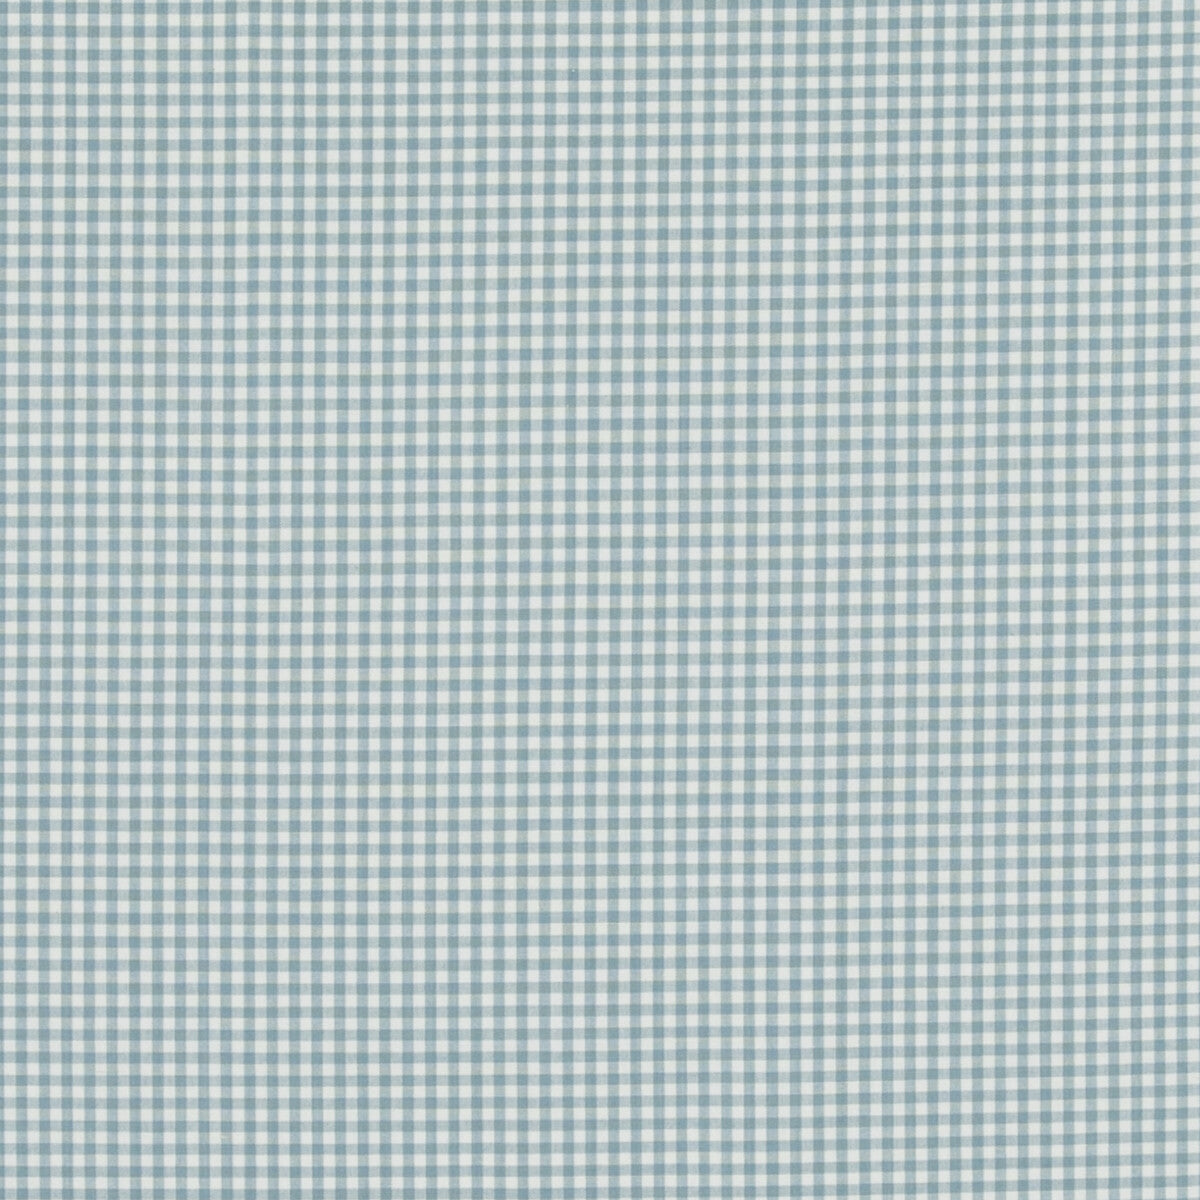 Sherborne Gingham fabric in aqua color - pattern PF50506.725.0 - by Baker Lifestyle in the Bridport collection